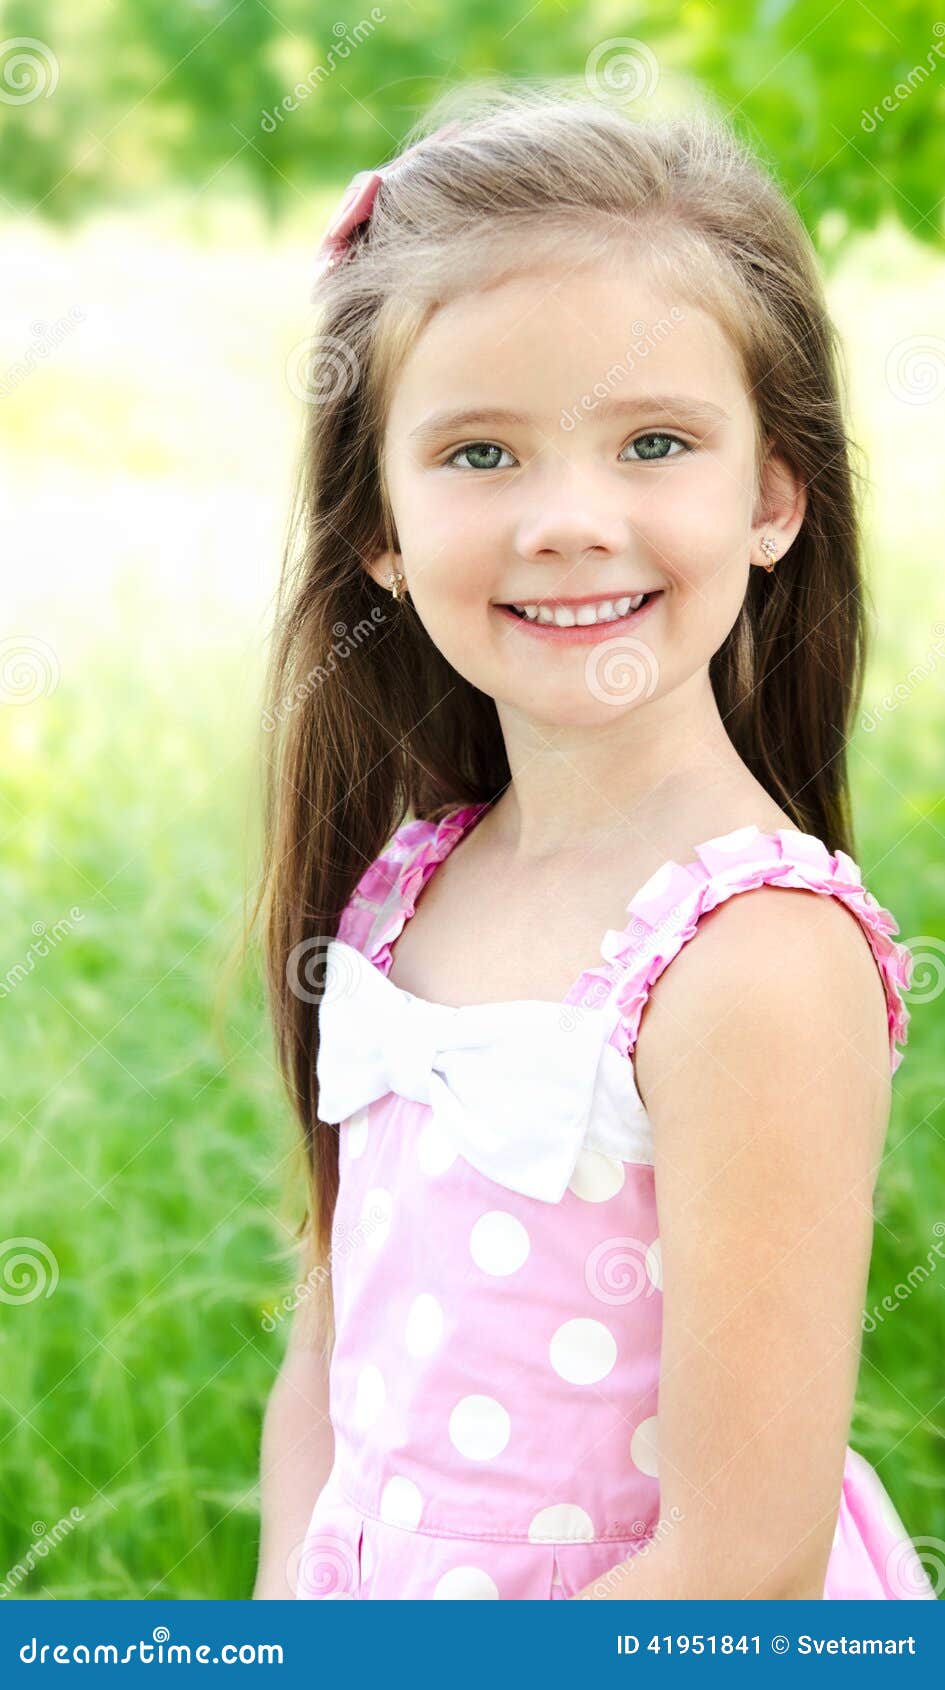 Portrait Of Adorable Smiling Little Girl Stock Image - Image: 41951841